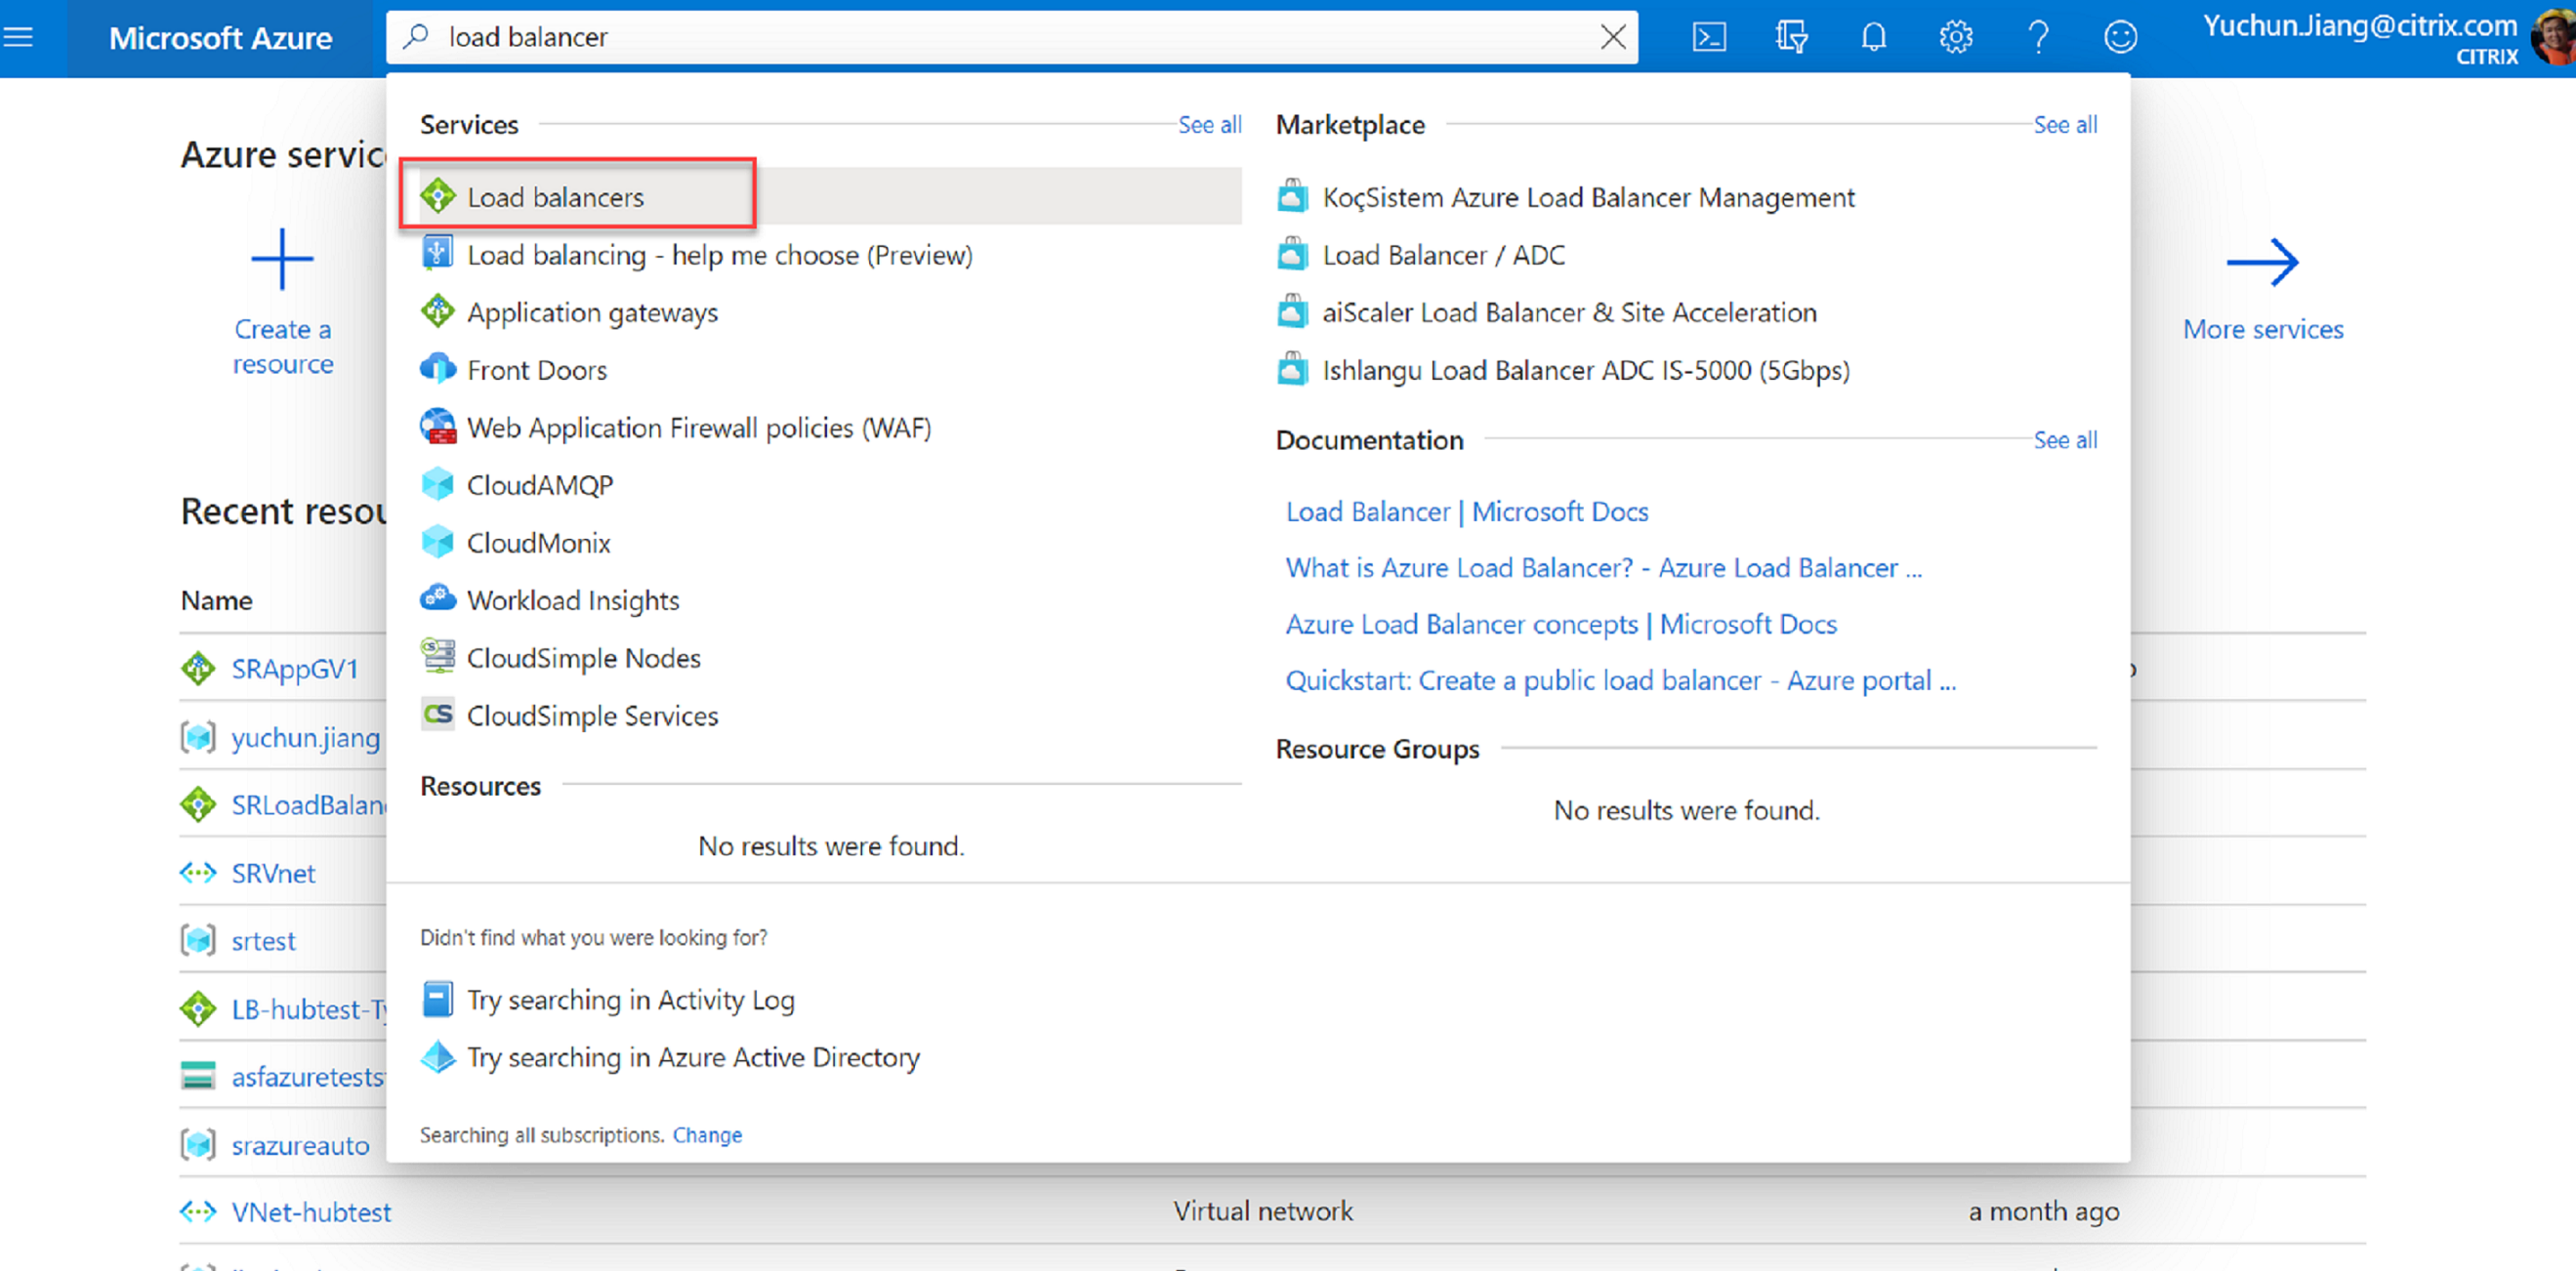 Search for Azure Load Balancer in the Marketplace